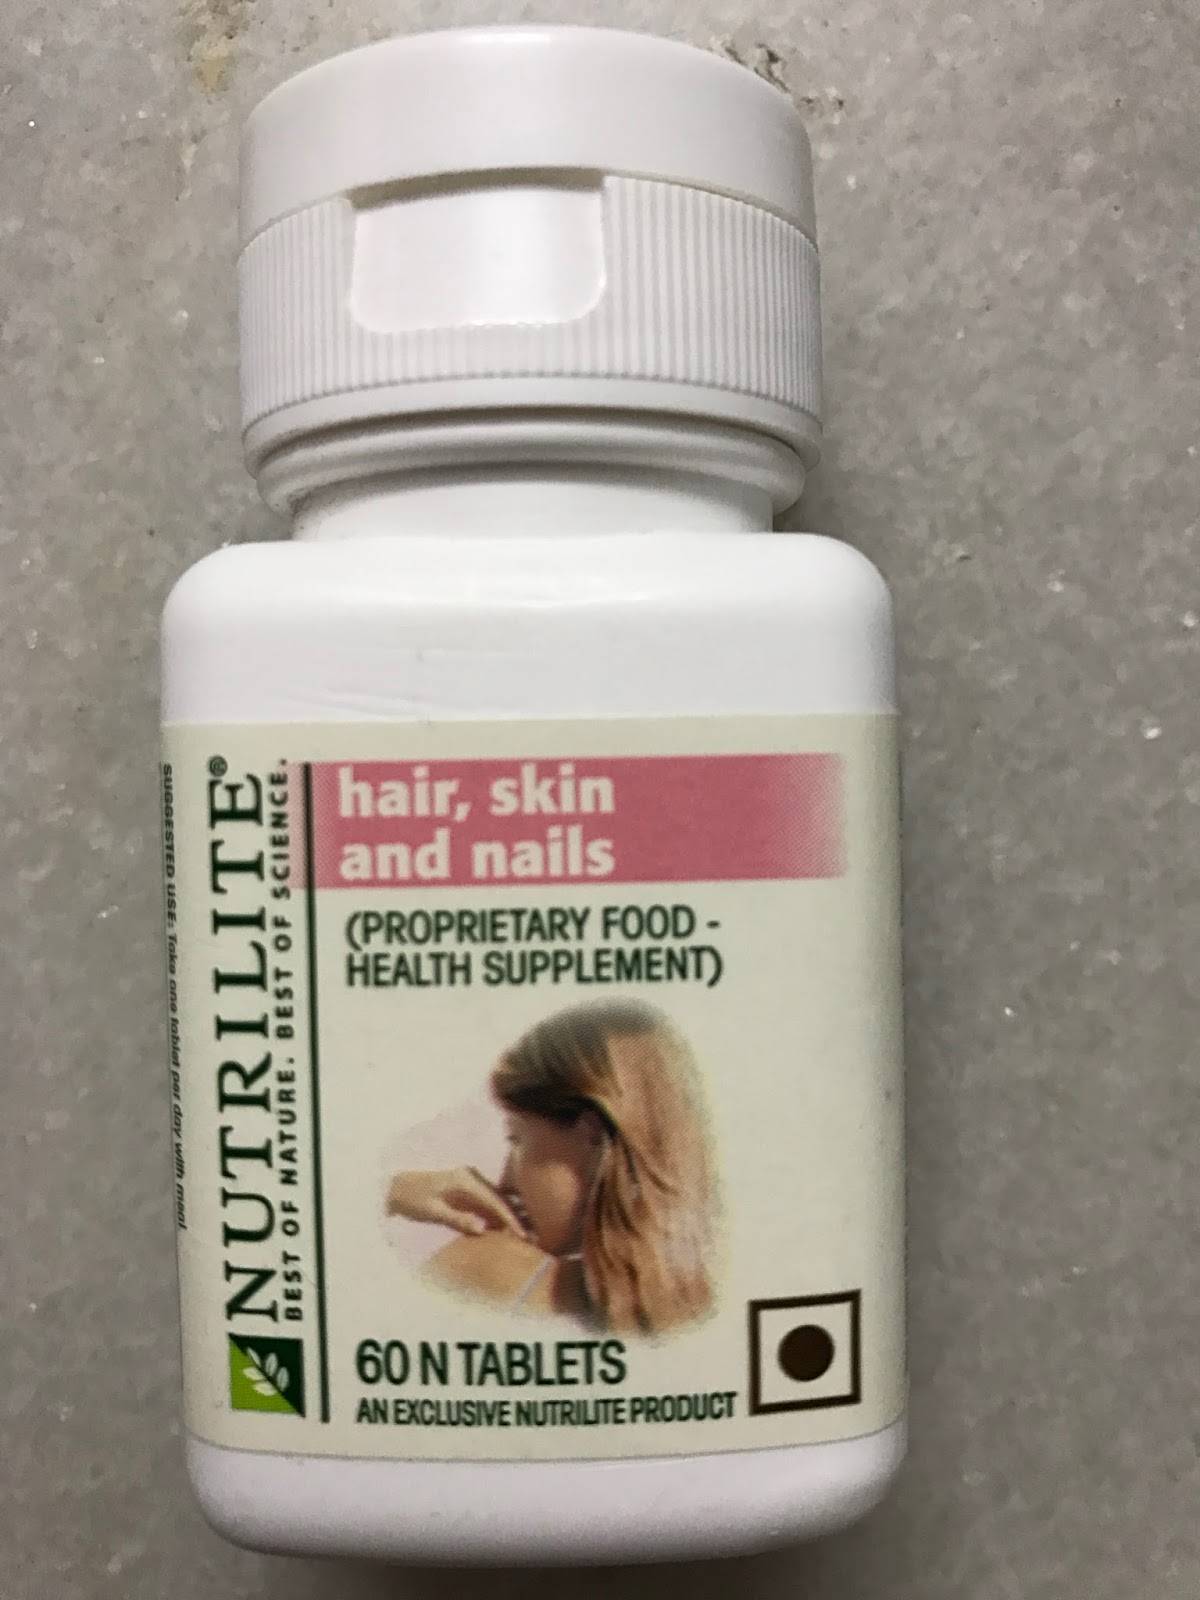 Nutrilite Hair Skin and Nails Supplements Review.